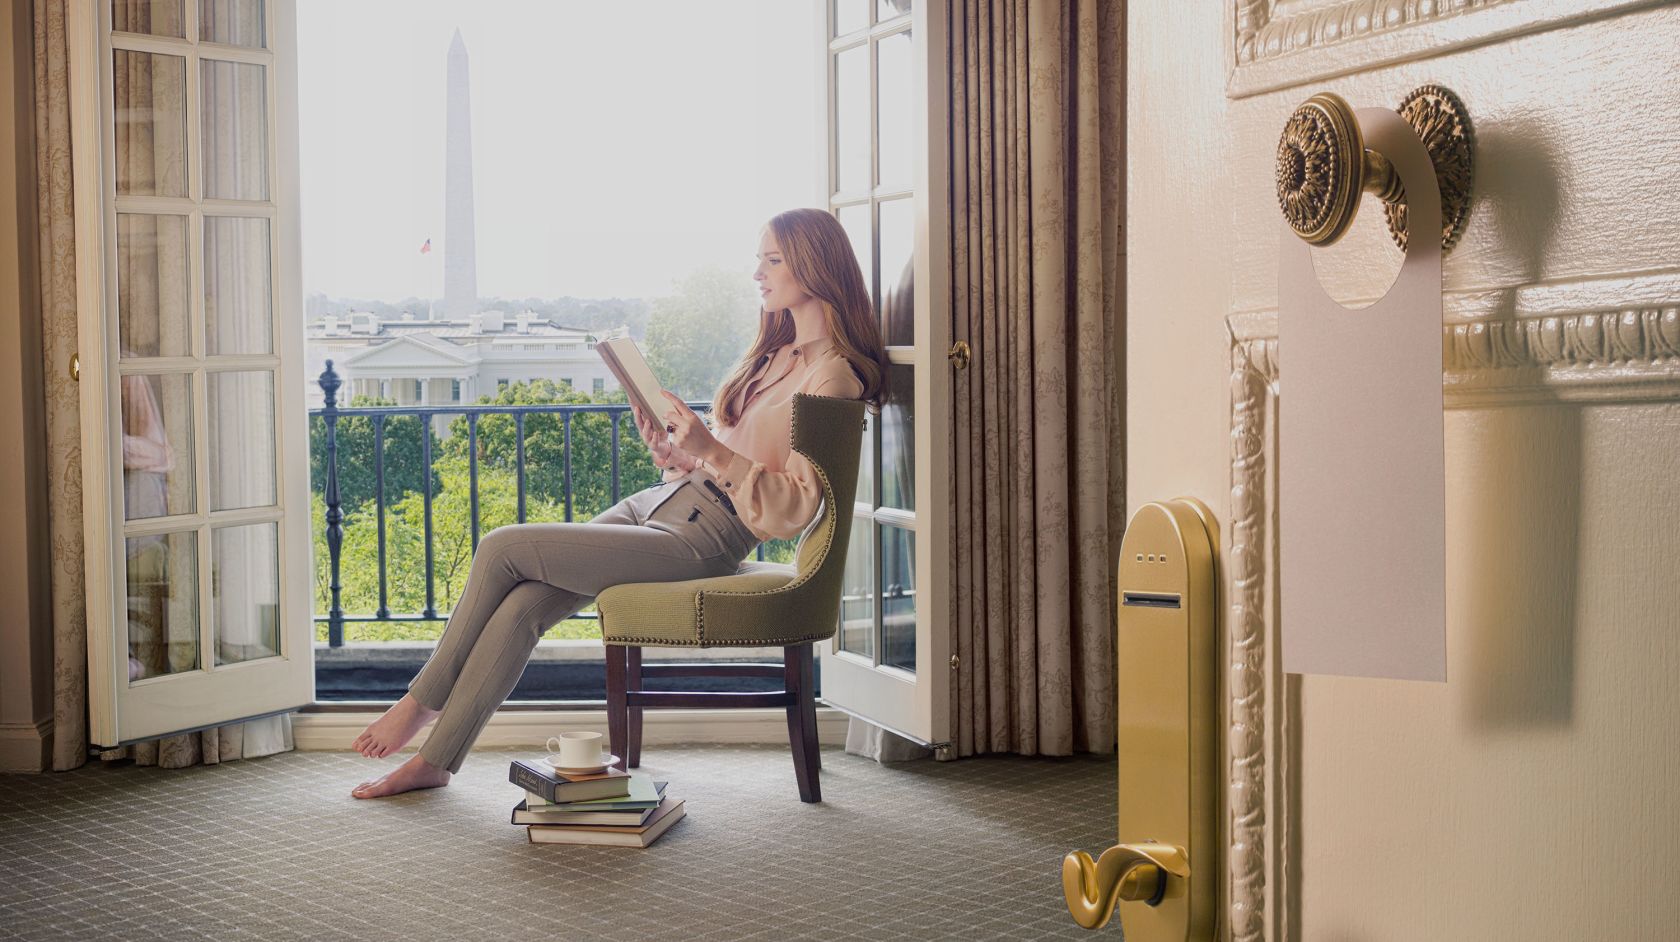 Woman at Hay Adams reading a book overlooking the Washington Monument in Washington D.C.